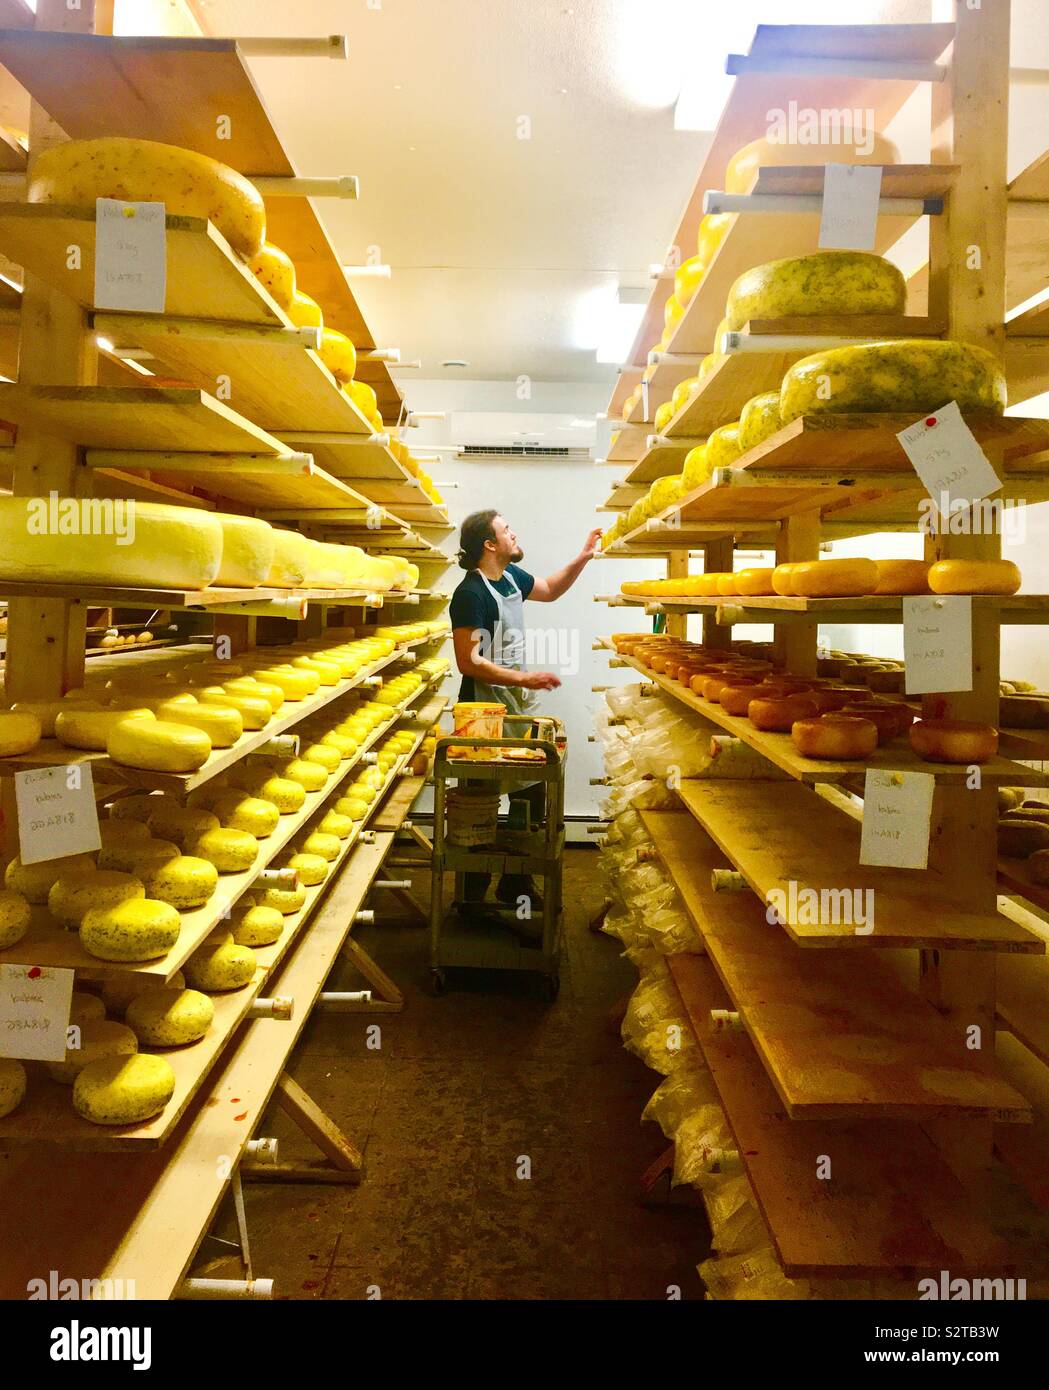 https://c8.alamy.com/comp/S2TB3W/cheese-maker-in-cheese-room-S2TB3W.jpg